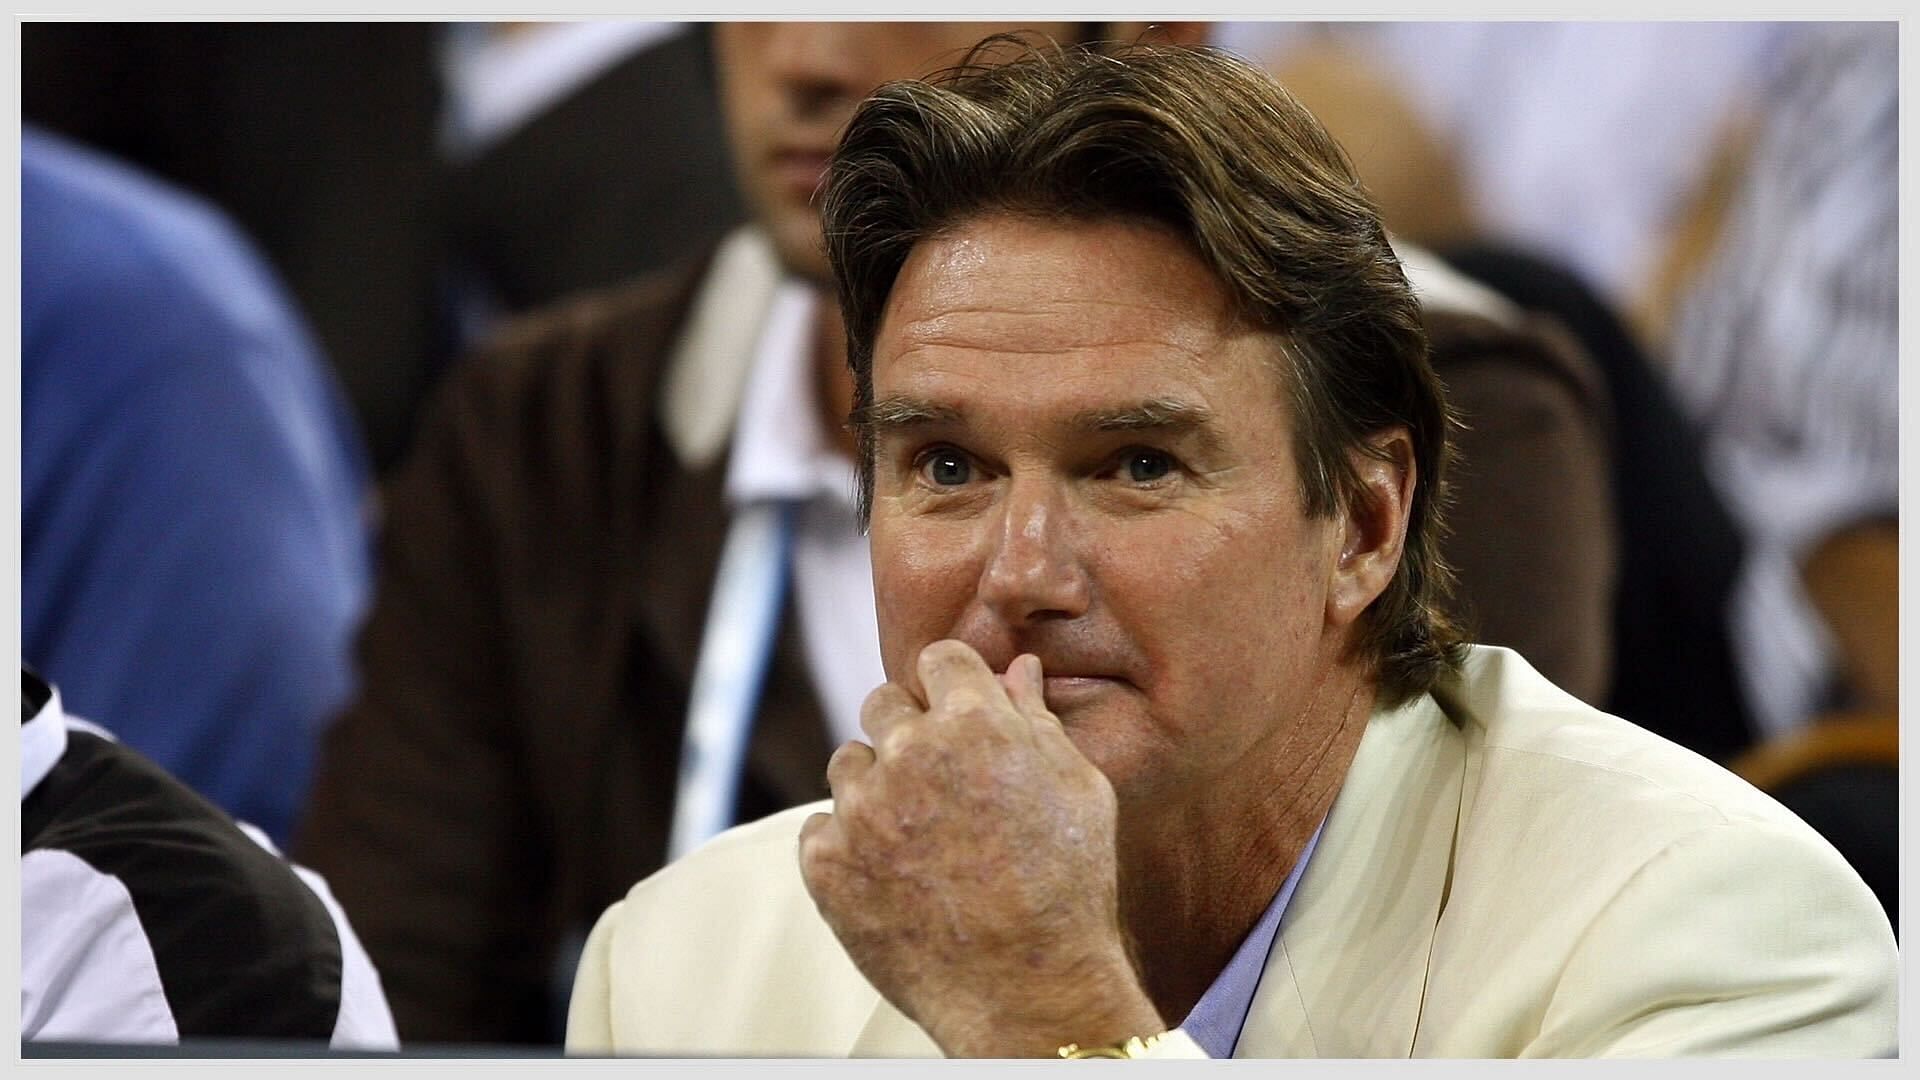 Jimmy Connors helped shape a new era in tennis